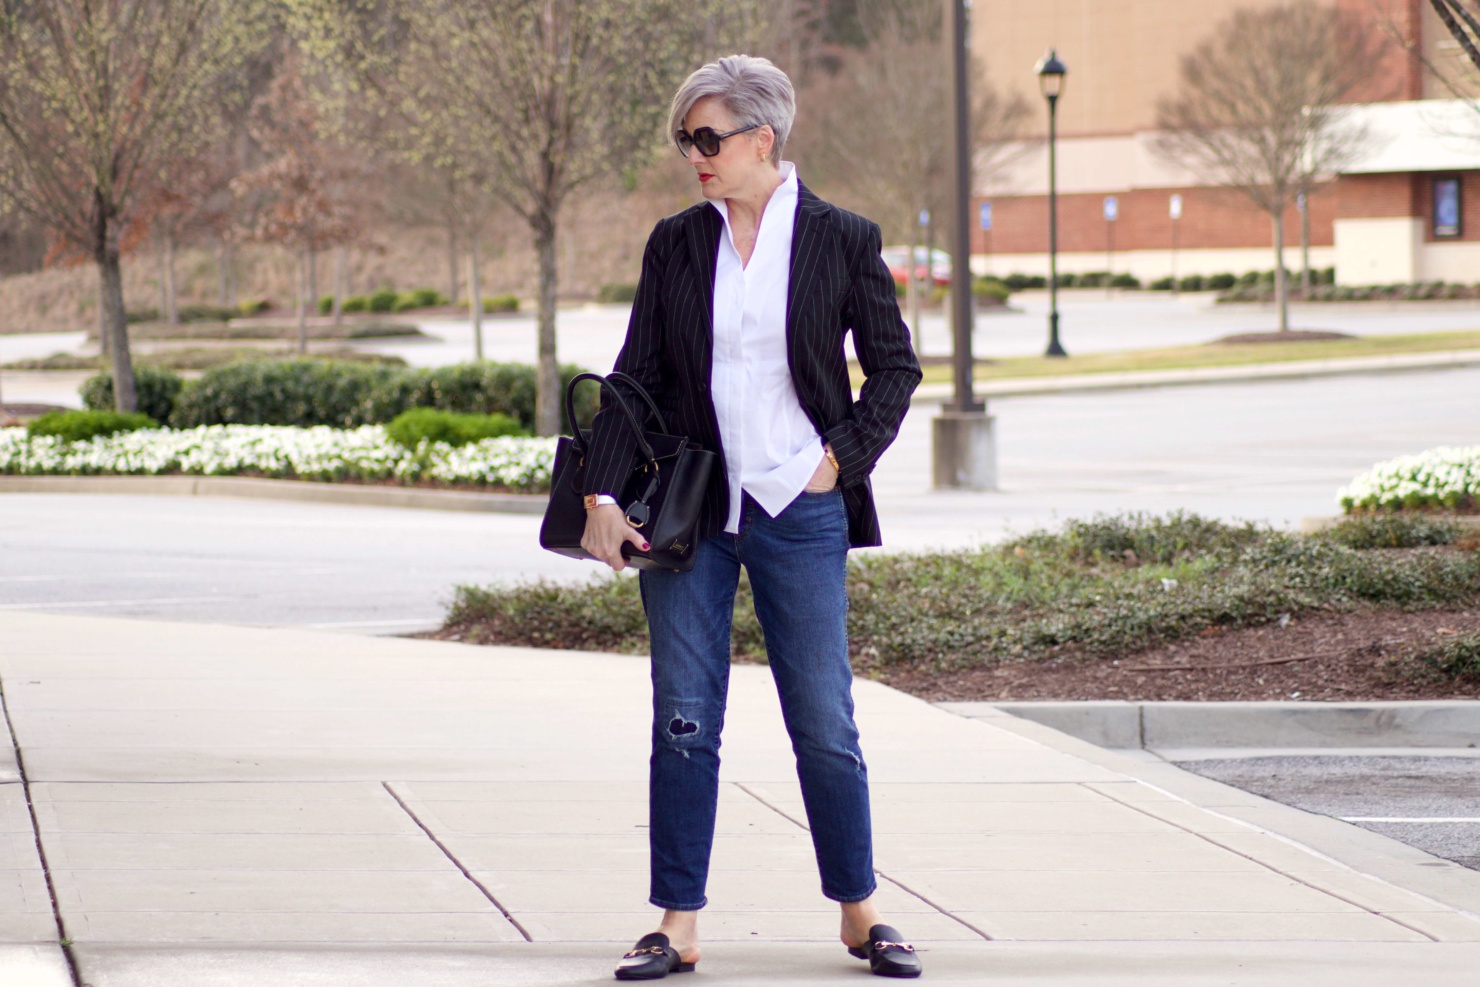 beth from Style at a Certain Age travels in style in a pinstripe blazer, white button down, blue jeans, and black slides